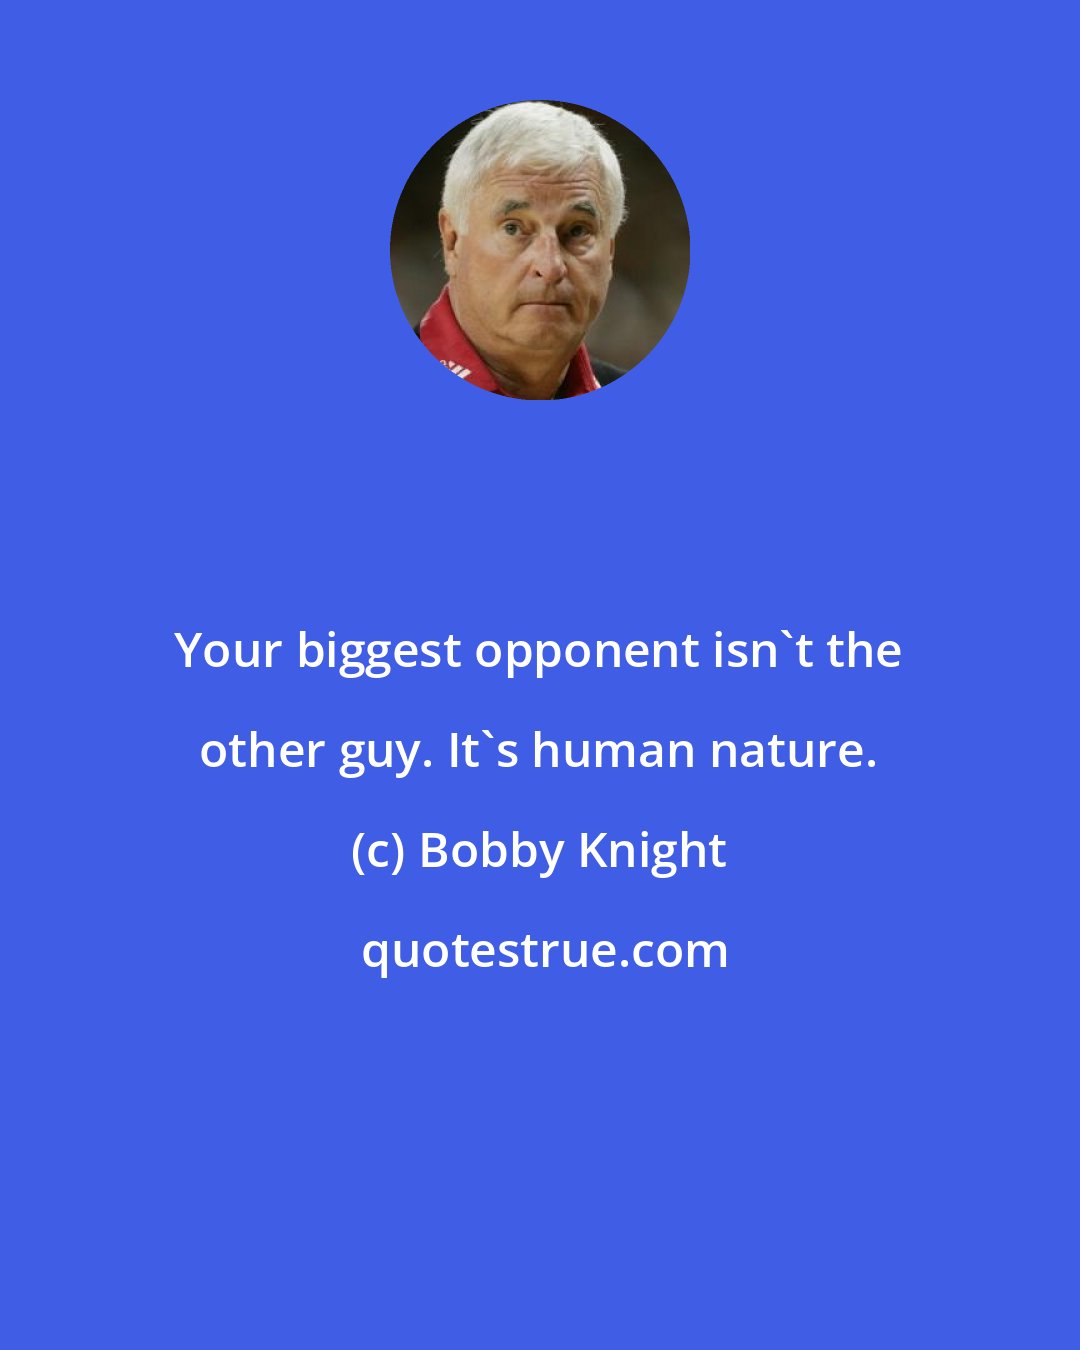 Bobby Knight: Your biggest opponent isn't the other guy. It's human nature.